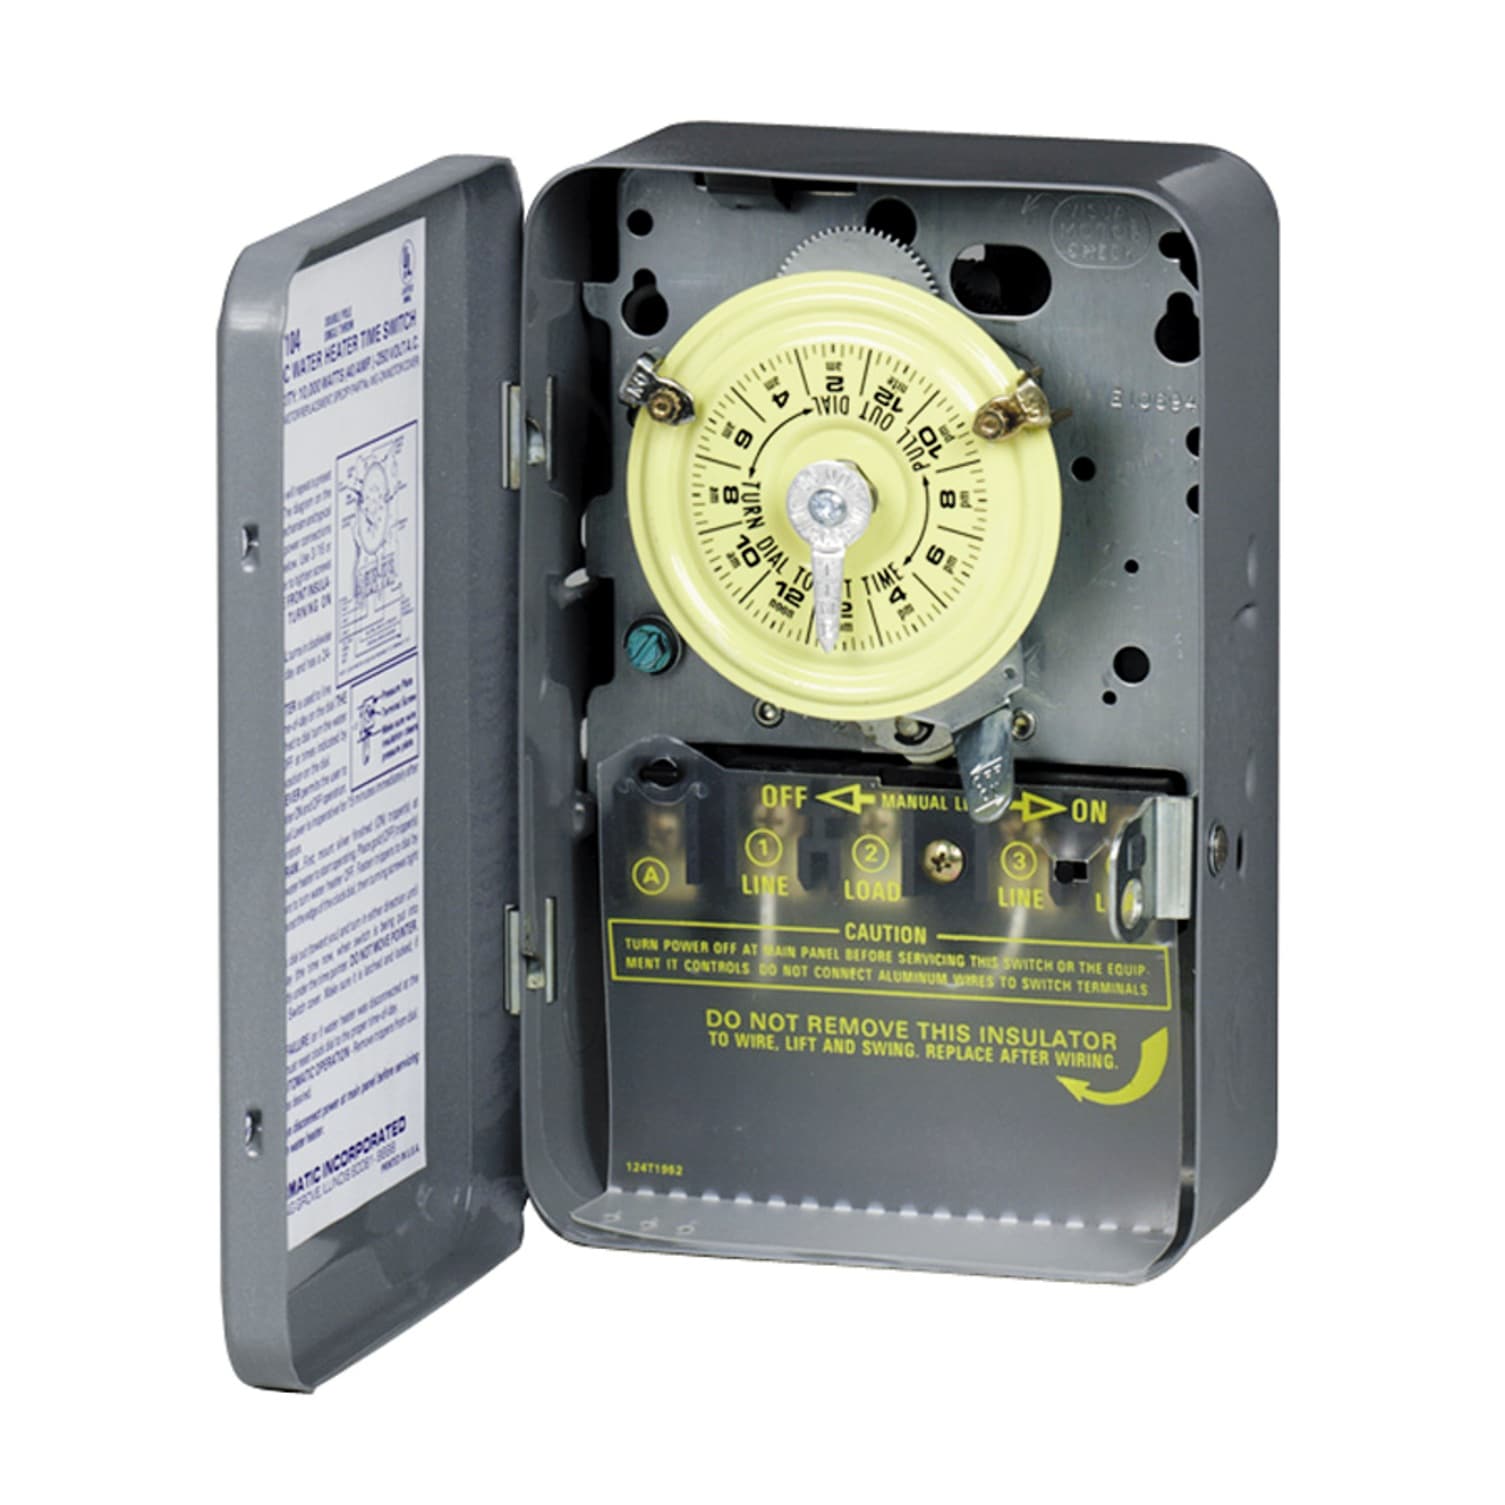 Intermatic T101P3 Time Switch in Plastic Enclosure for sale online 